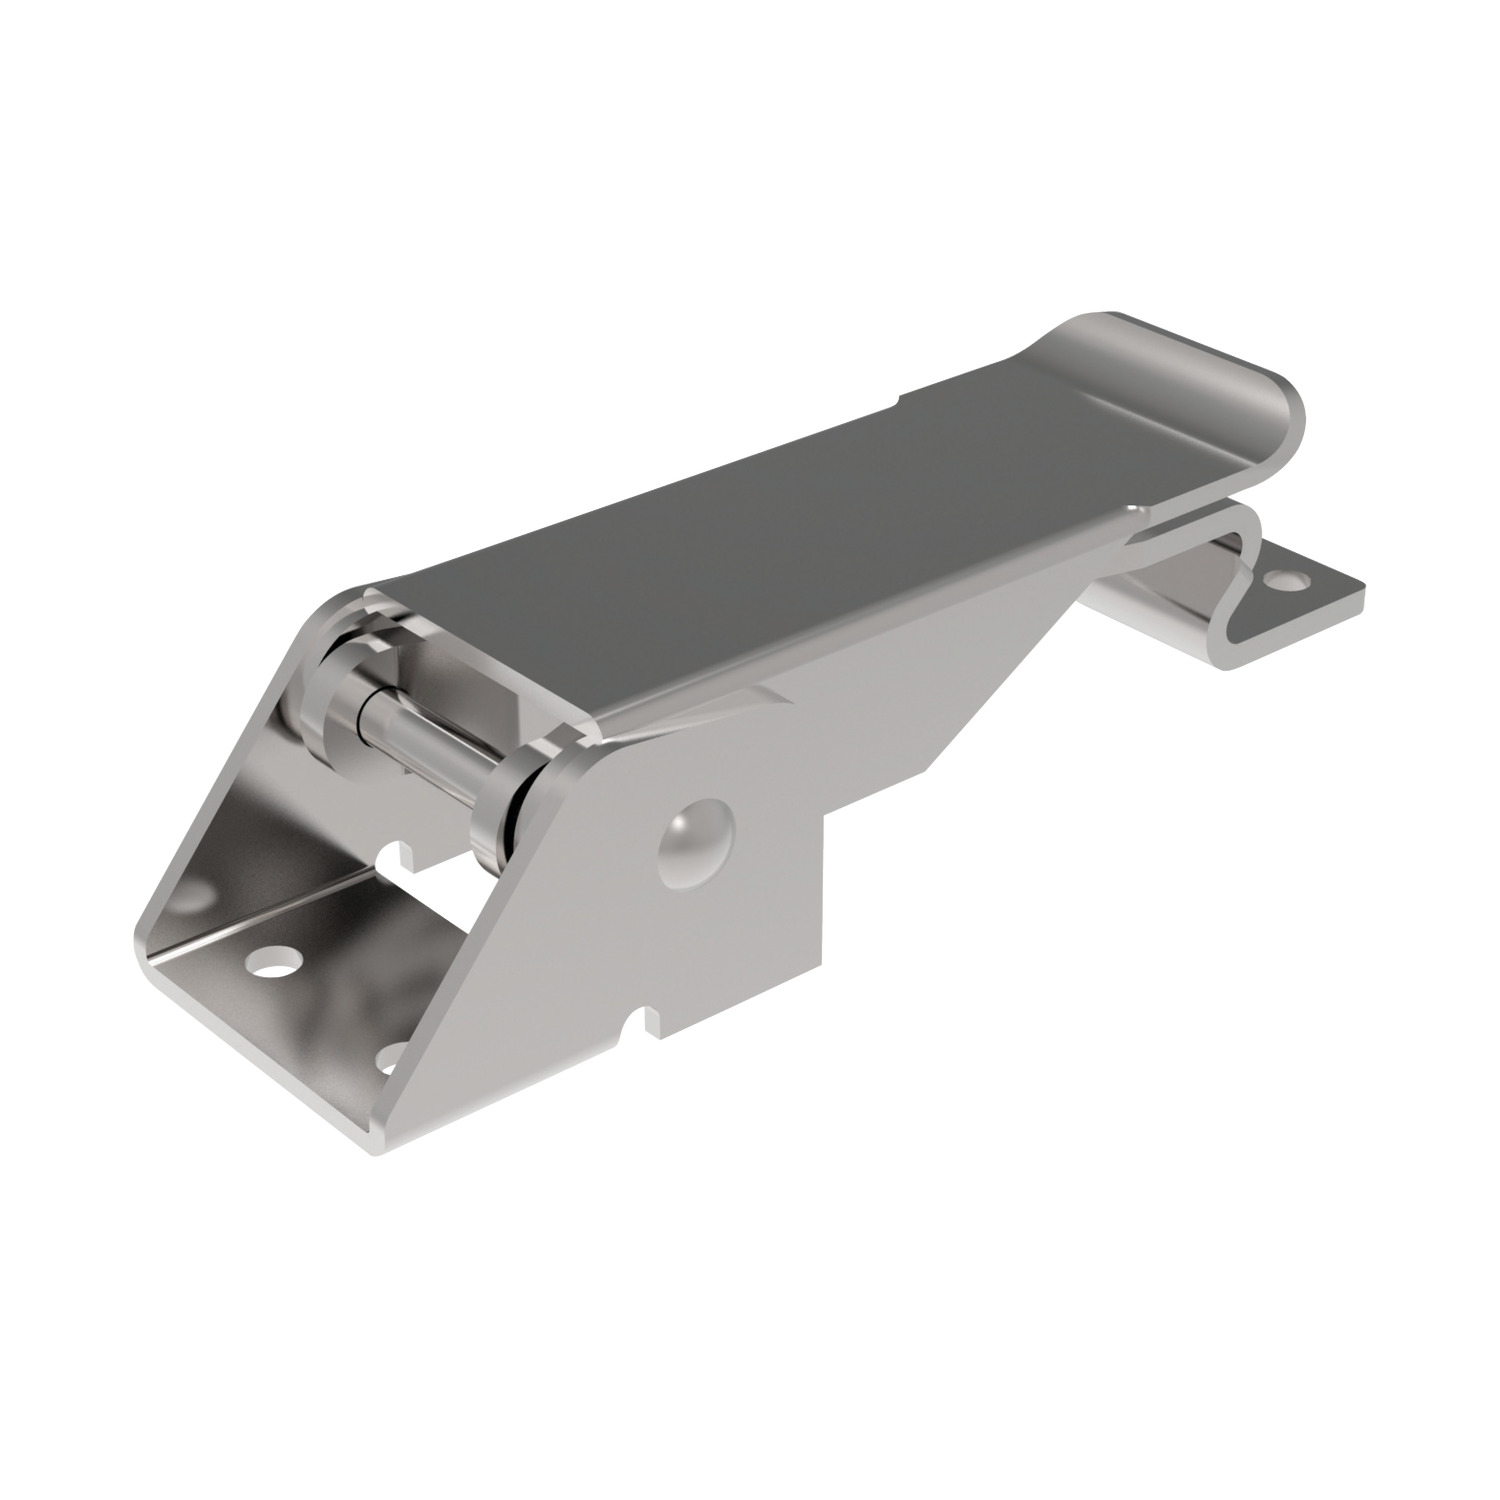 Toggle Latches Rear strike mounting draw latch, with upto 12 mm adjustment. Compact design, with total foot print of 82mm.